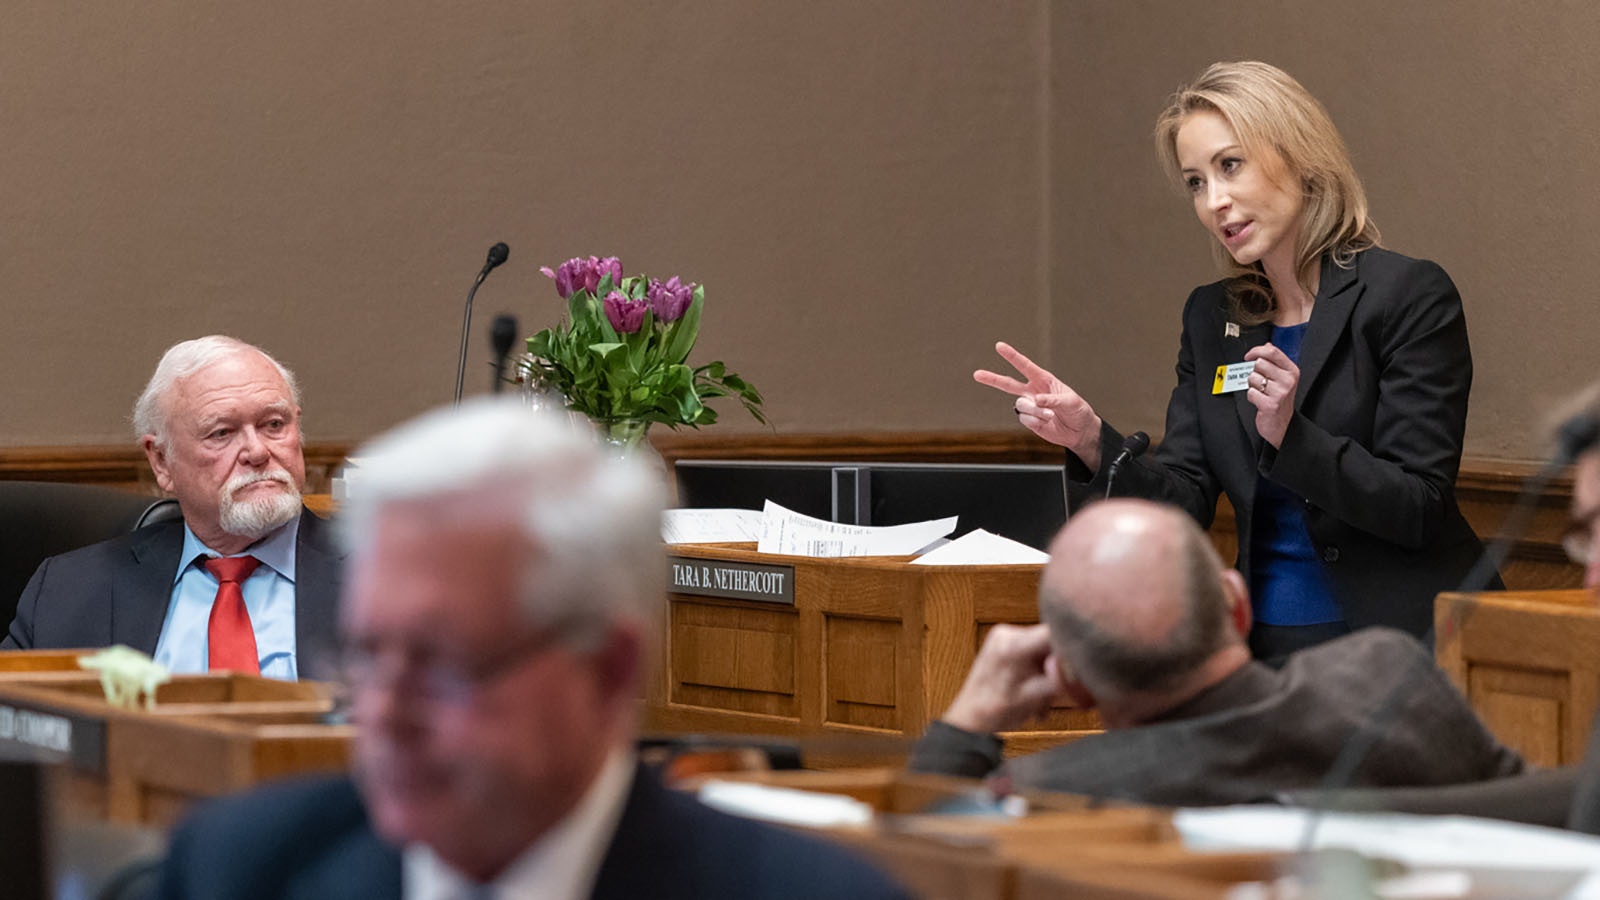 Sen. Tara Nethercott took a leading role on the Senate floor Friday during a final push to approve the budget.